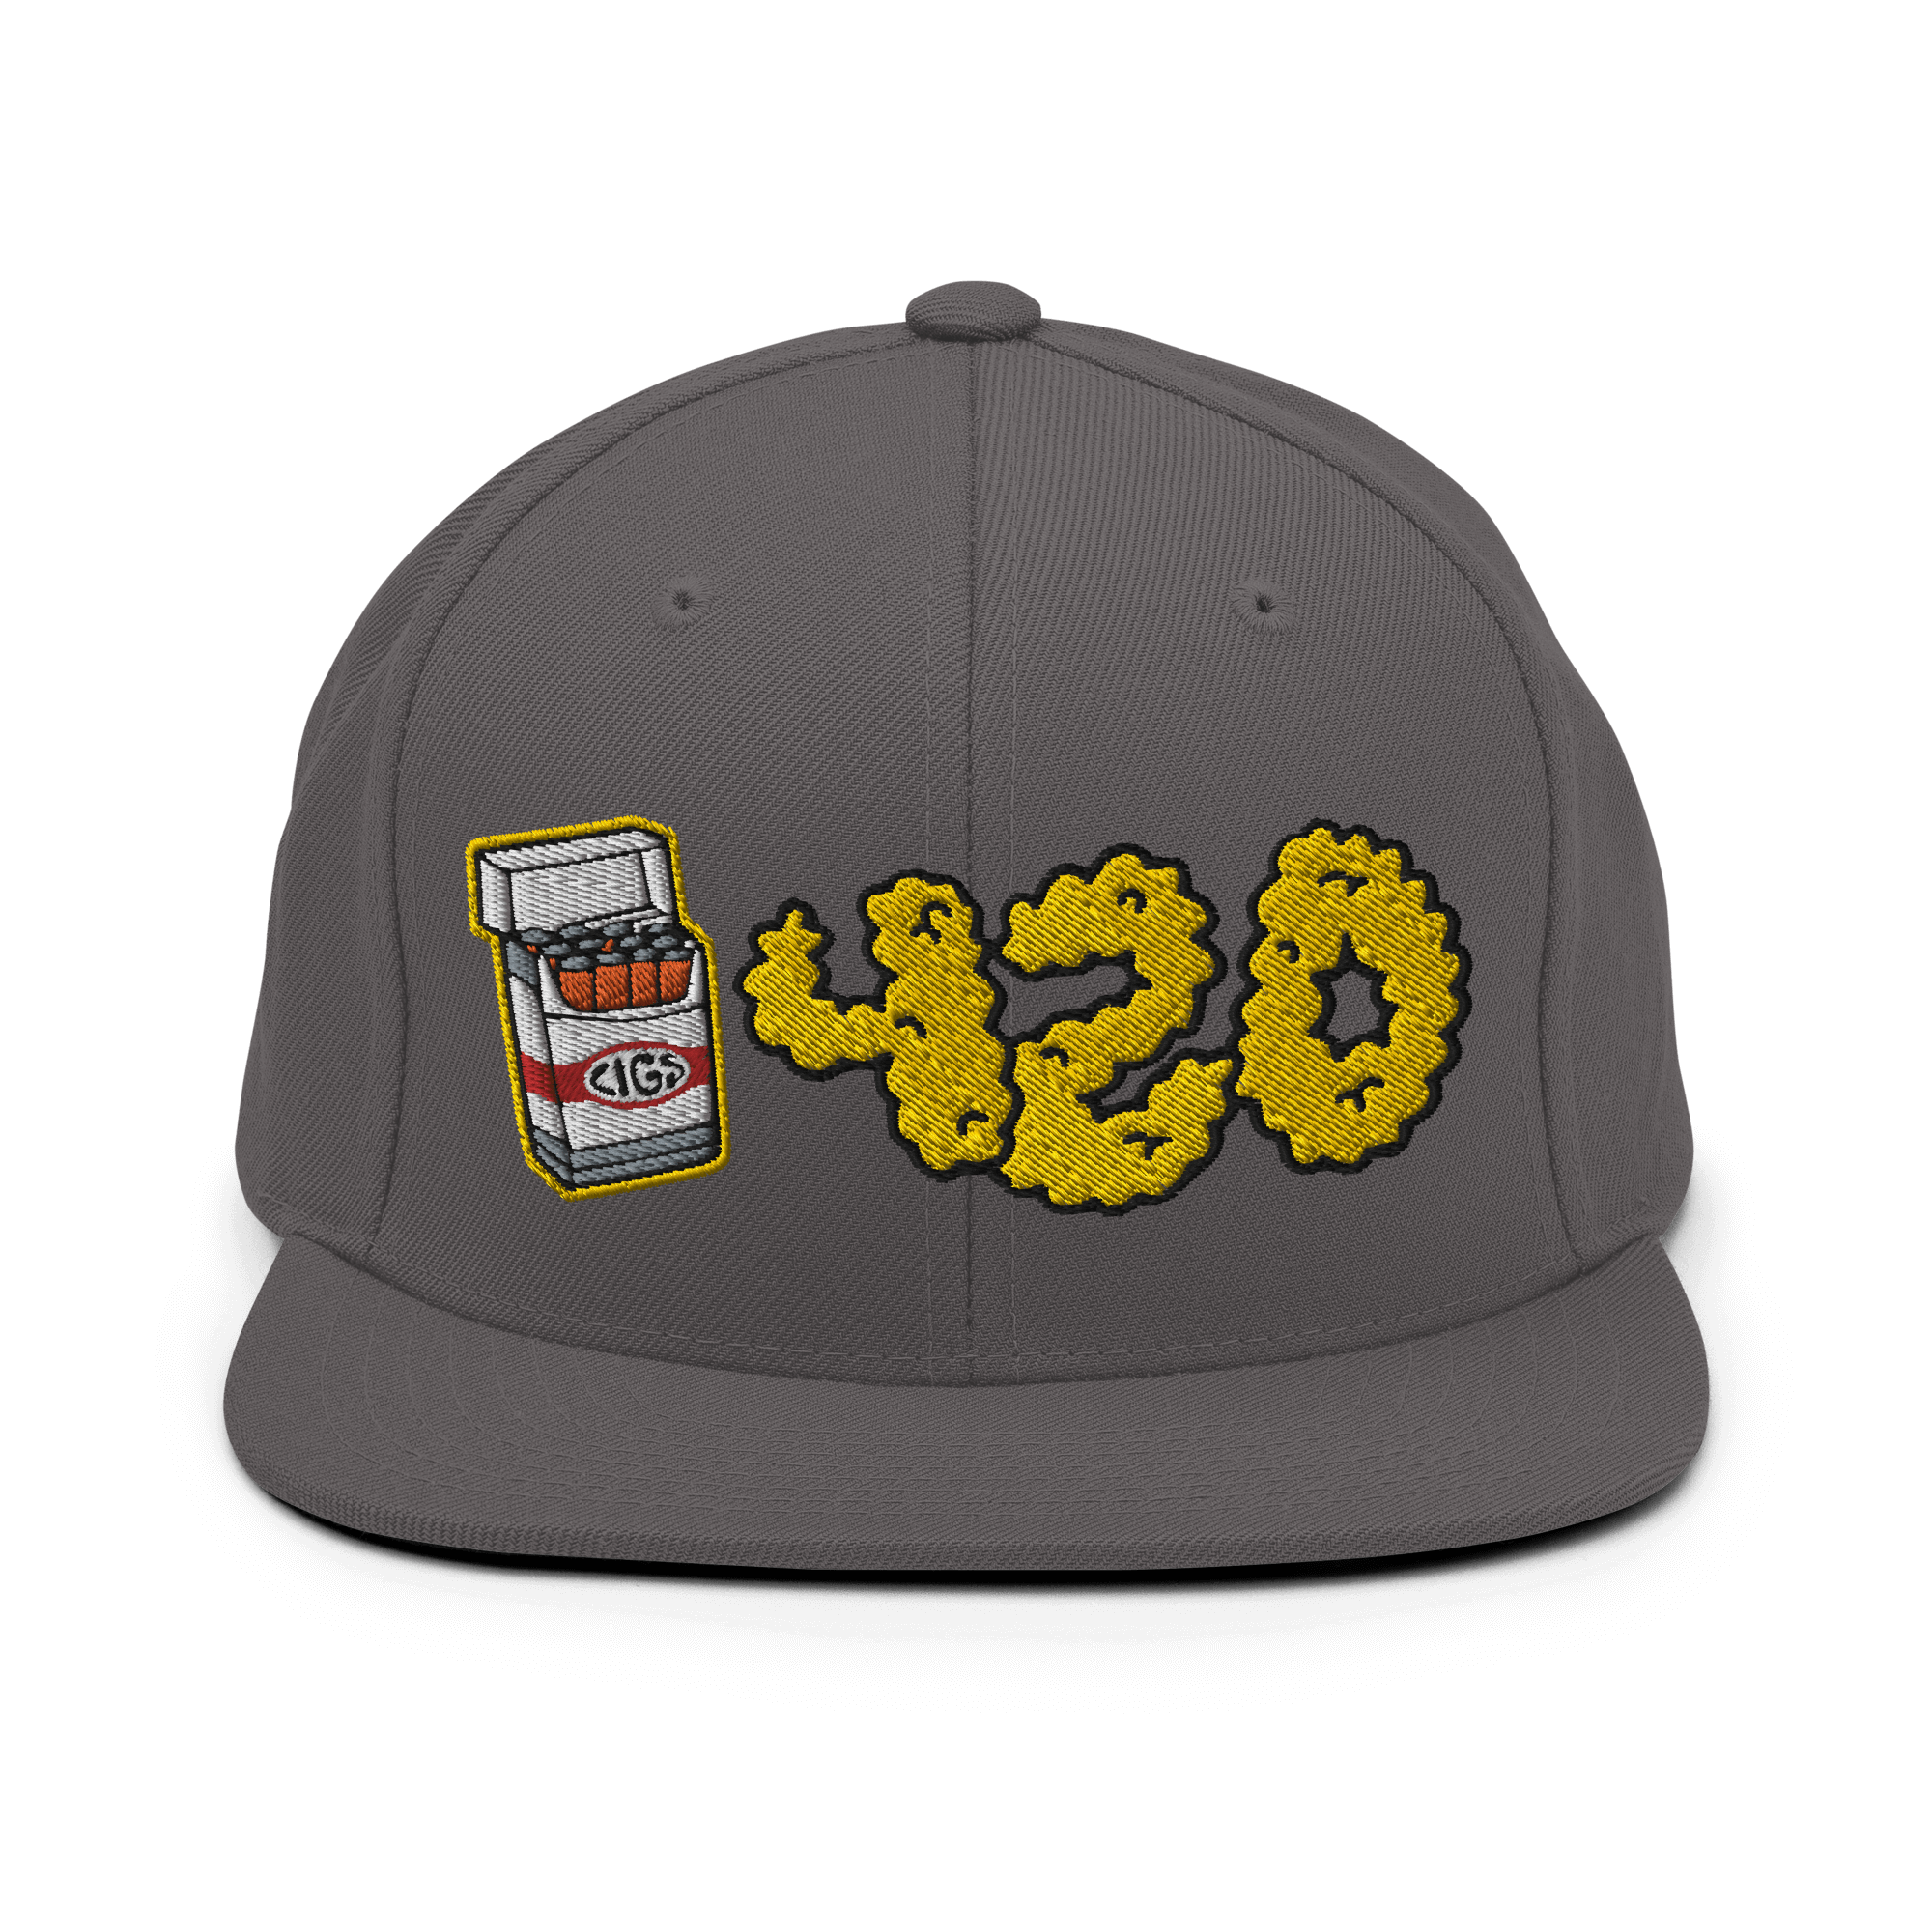 Smog 420 Snapback CapDive into urban chic with the Smog 420 Snapback Cap – a classic fit, flat brim, and full buckram for a look that's both structured and laid-back. The adjustable snap closure ensures a comfortable, one-size-fits-most style. Crafted exc